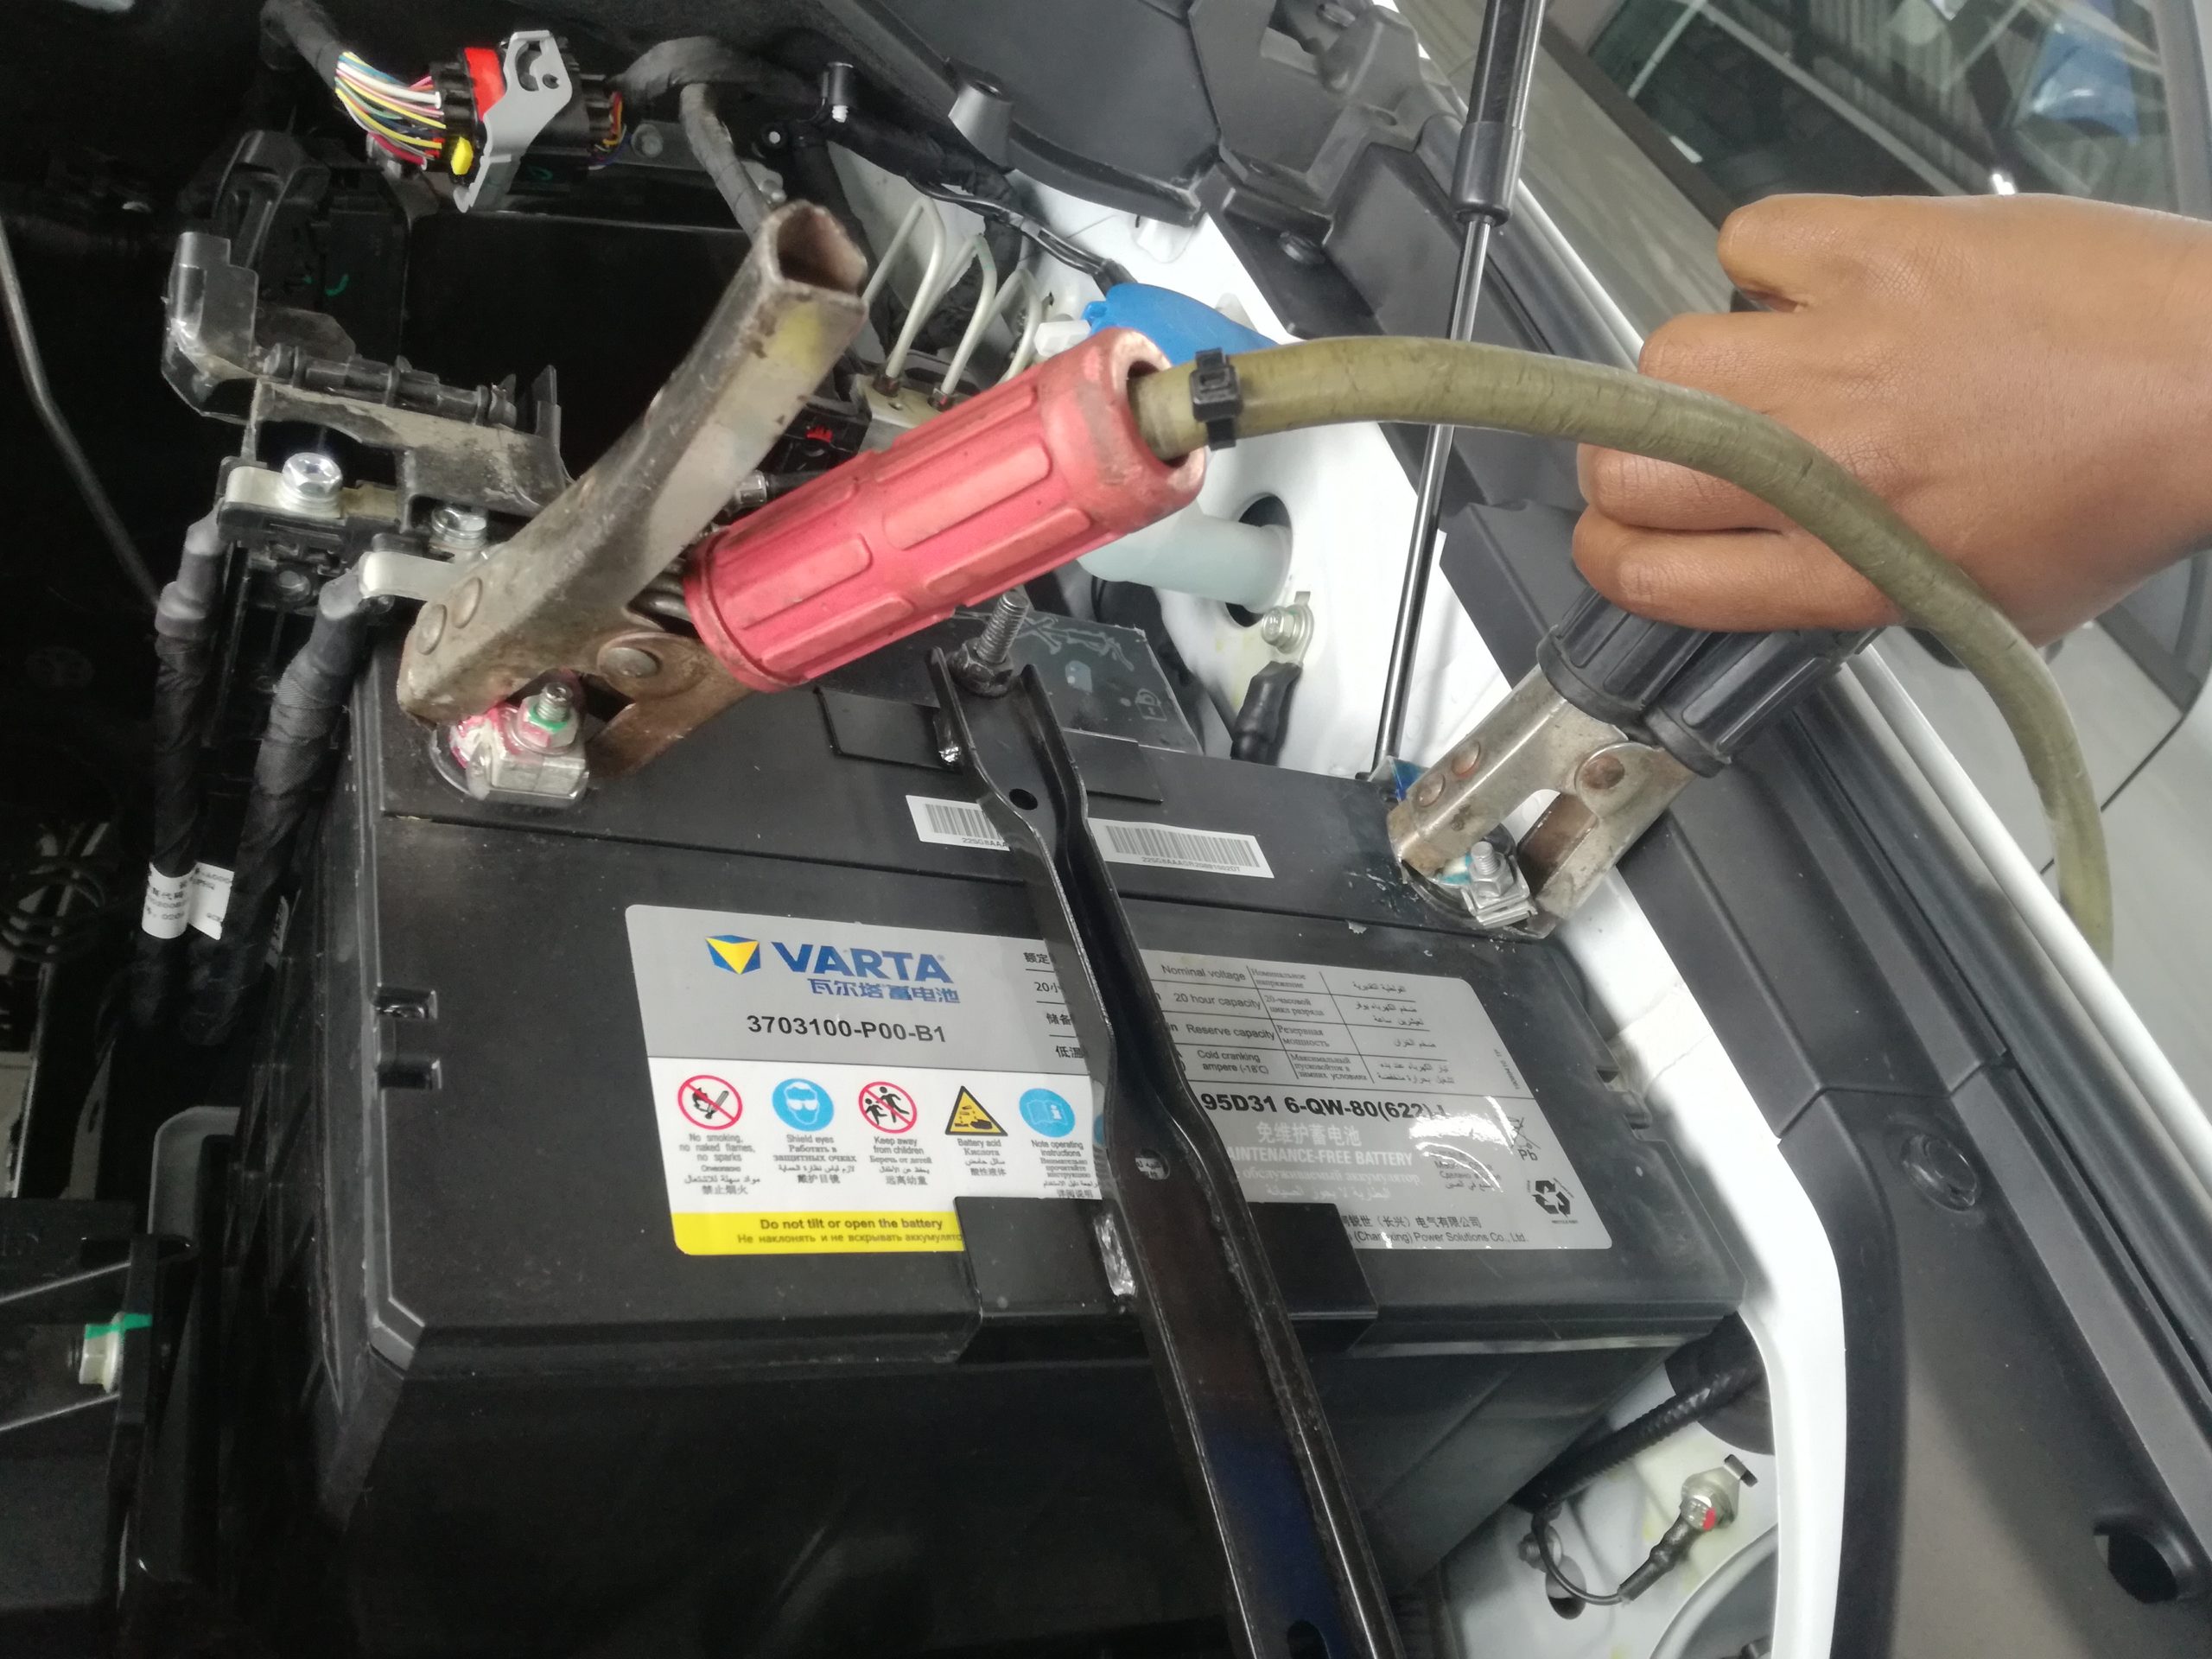 Boosting a car battery: steps to follow